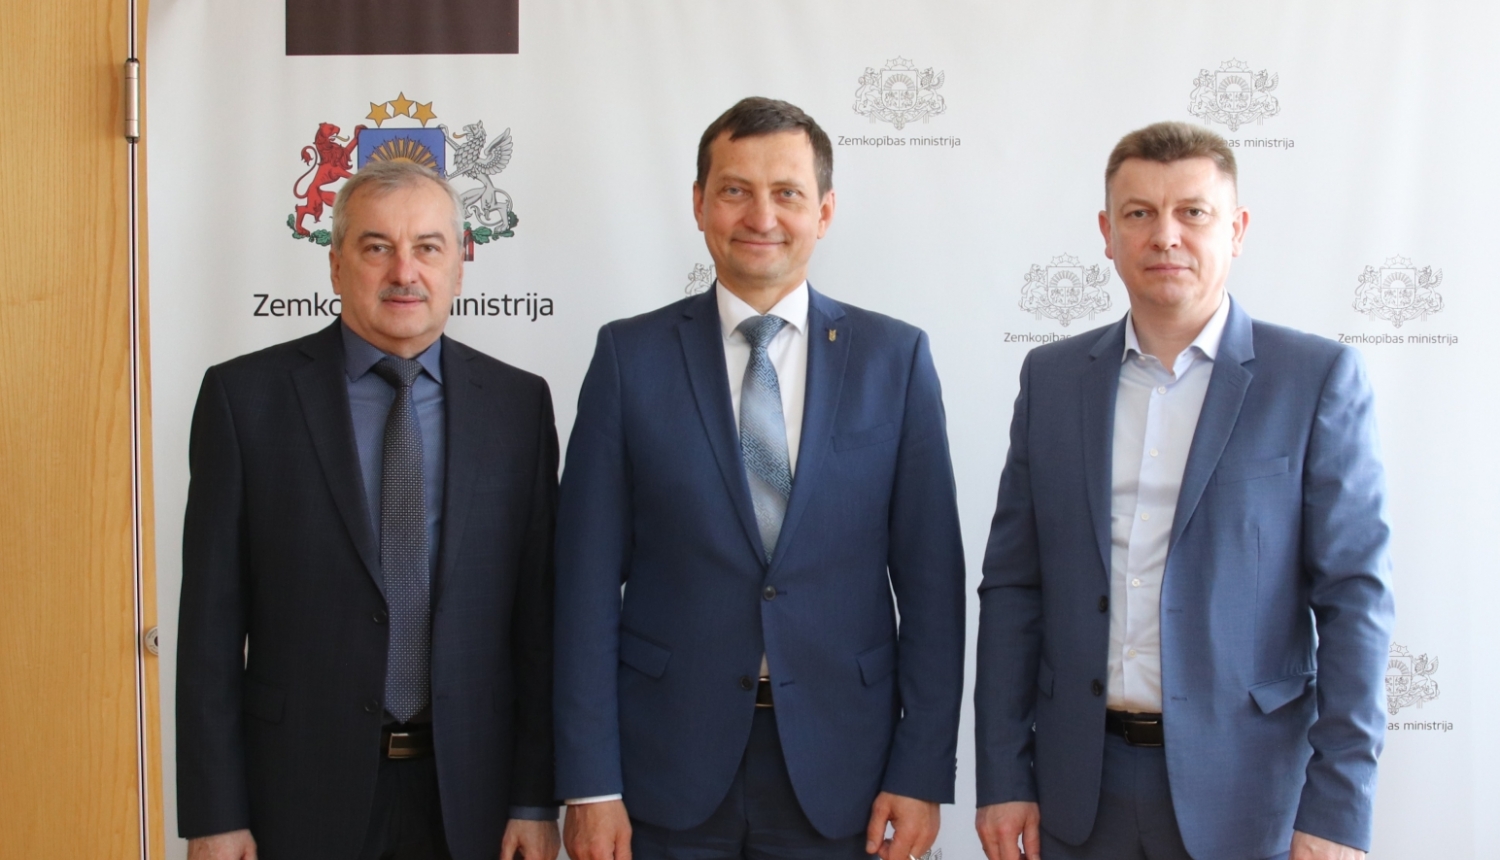 The Minister A. Krauze and the delegation from Ukraine’s Ternopil region has discussed cooperation opportunities and interests in the field of agriculture